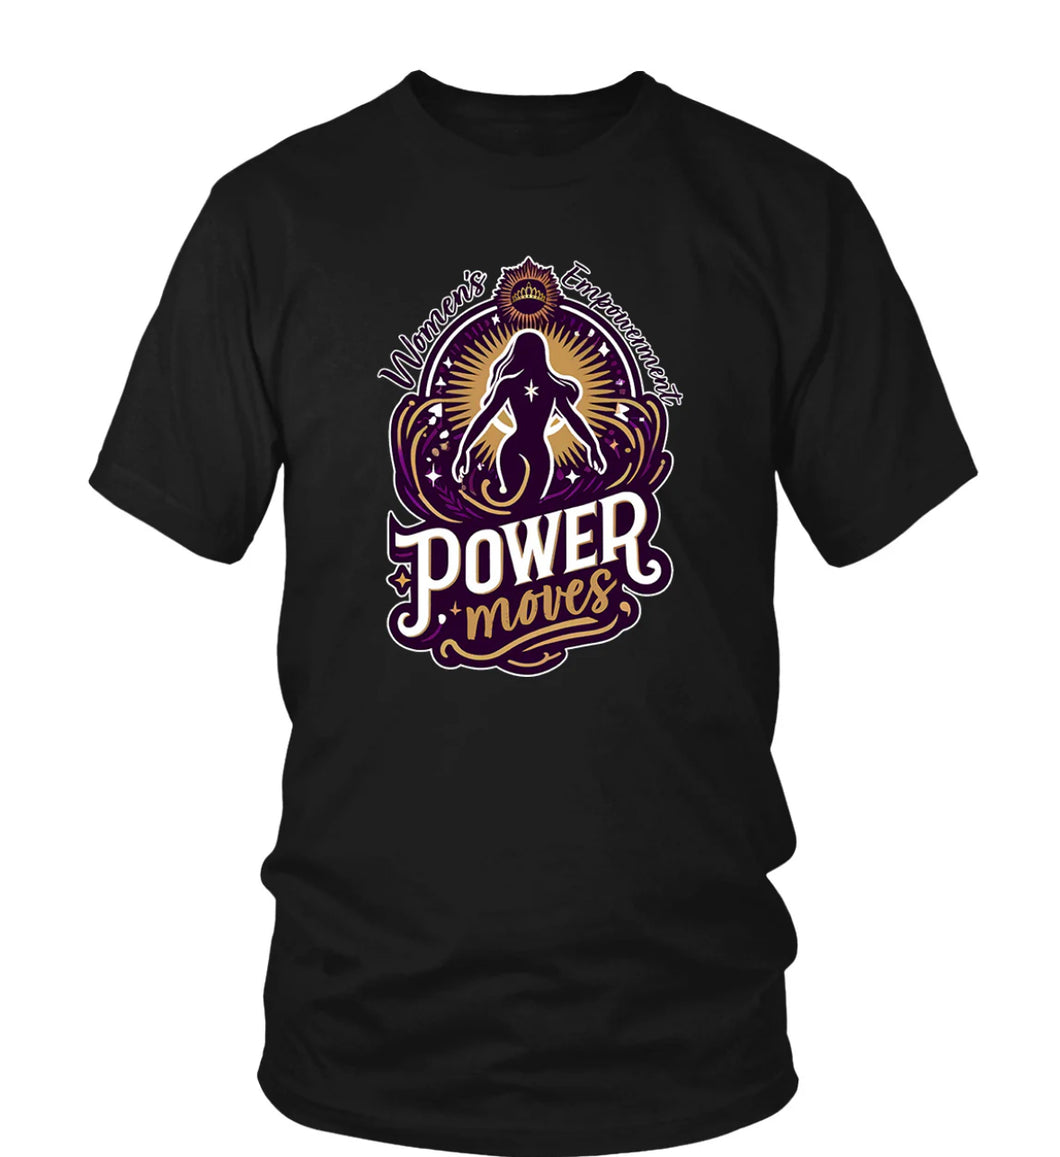 Black Women's Empowerment T-shirt Inspired by Sarah Jakes Roberts book POWER MOVES